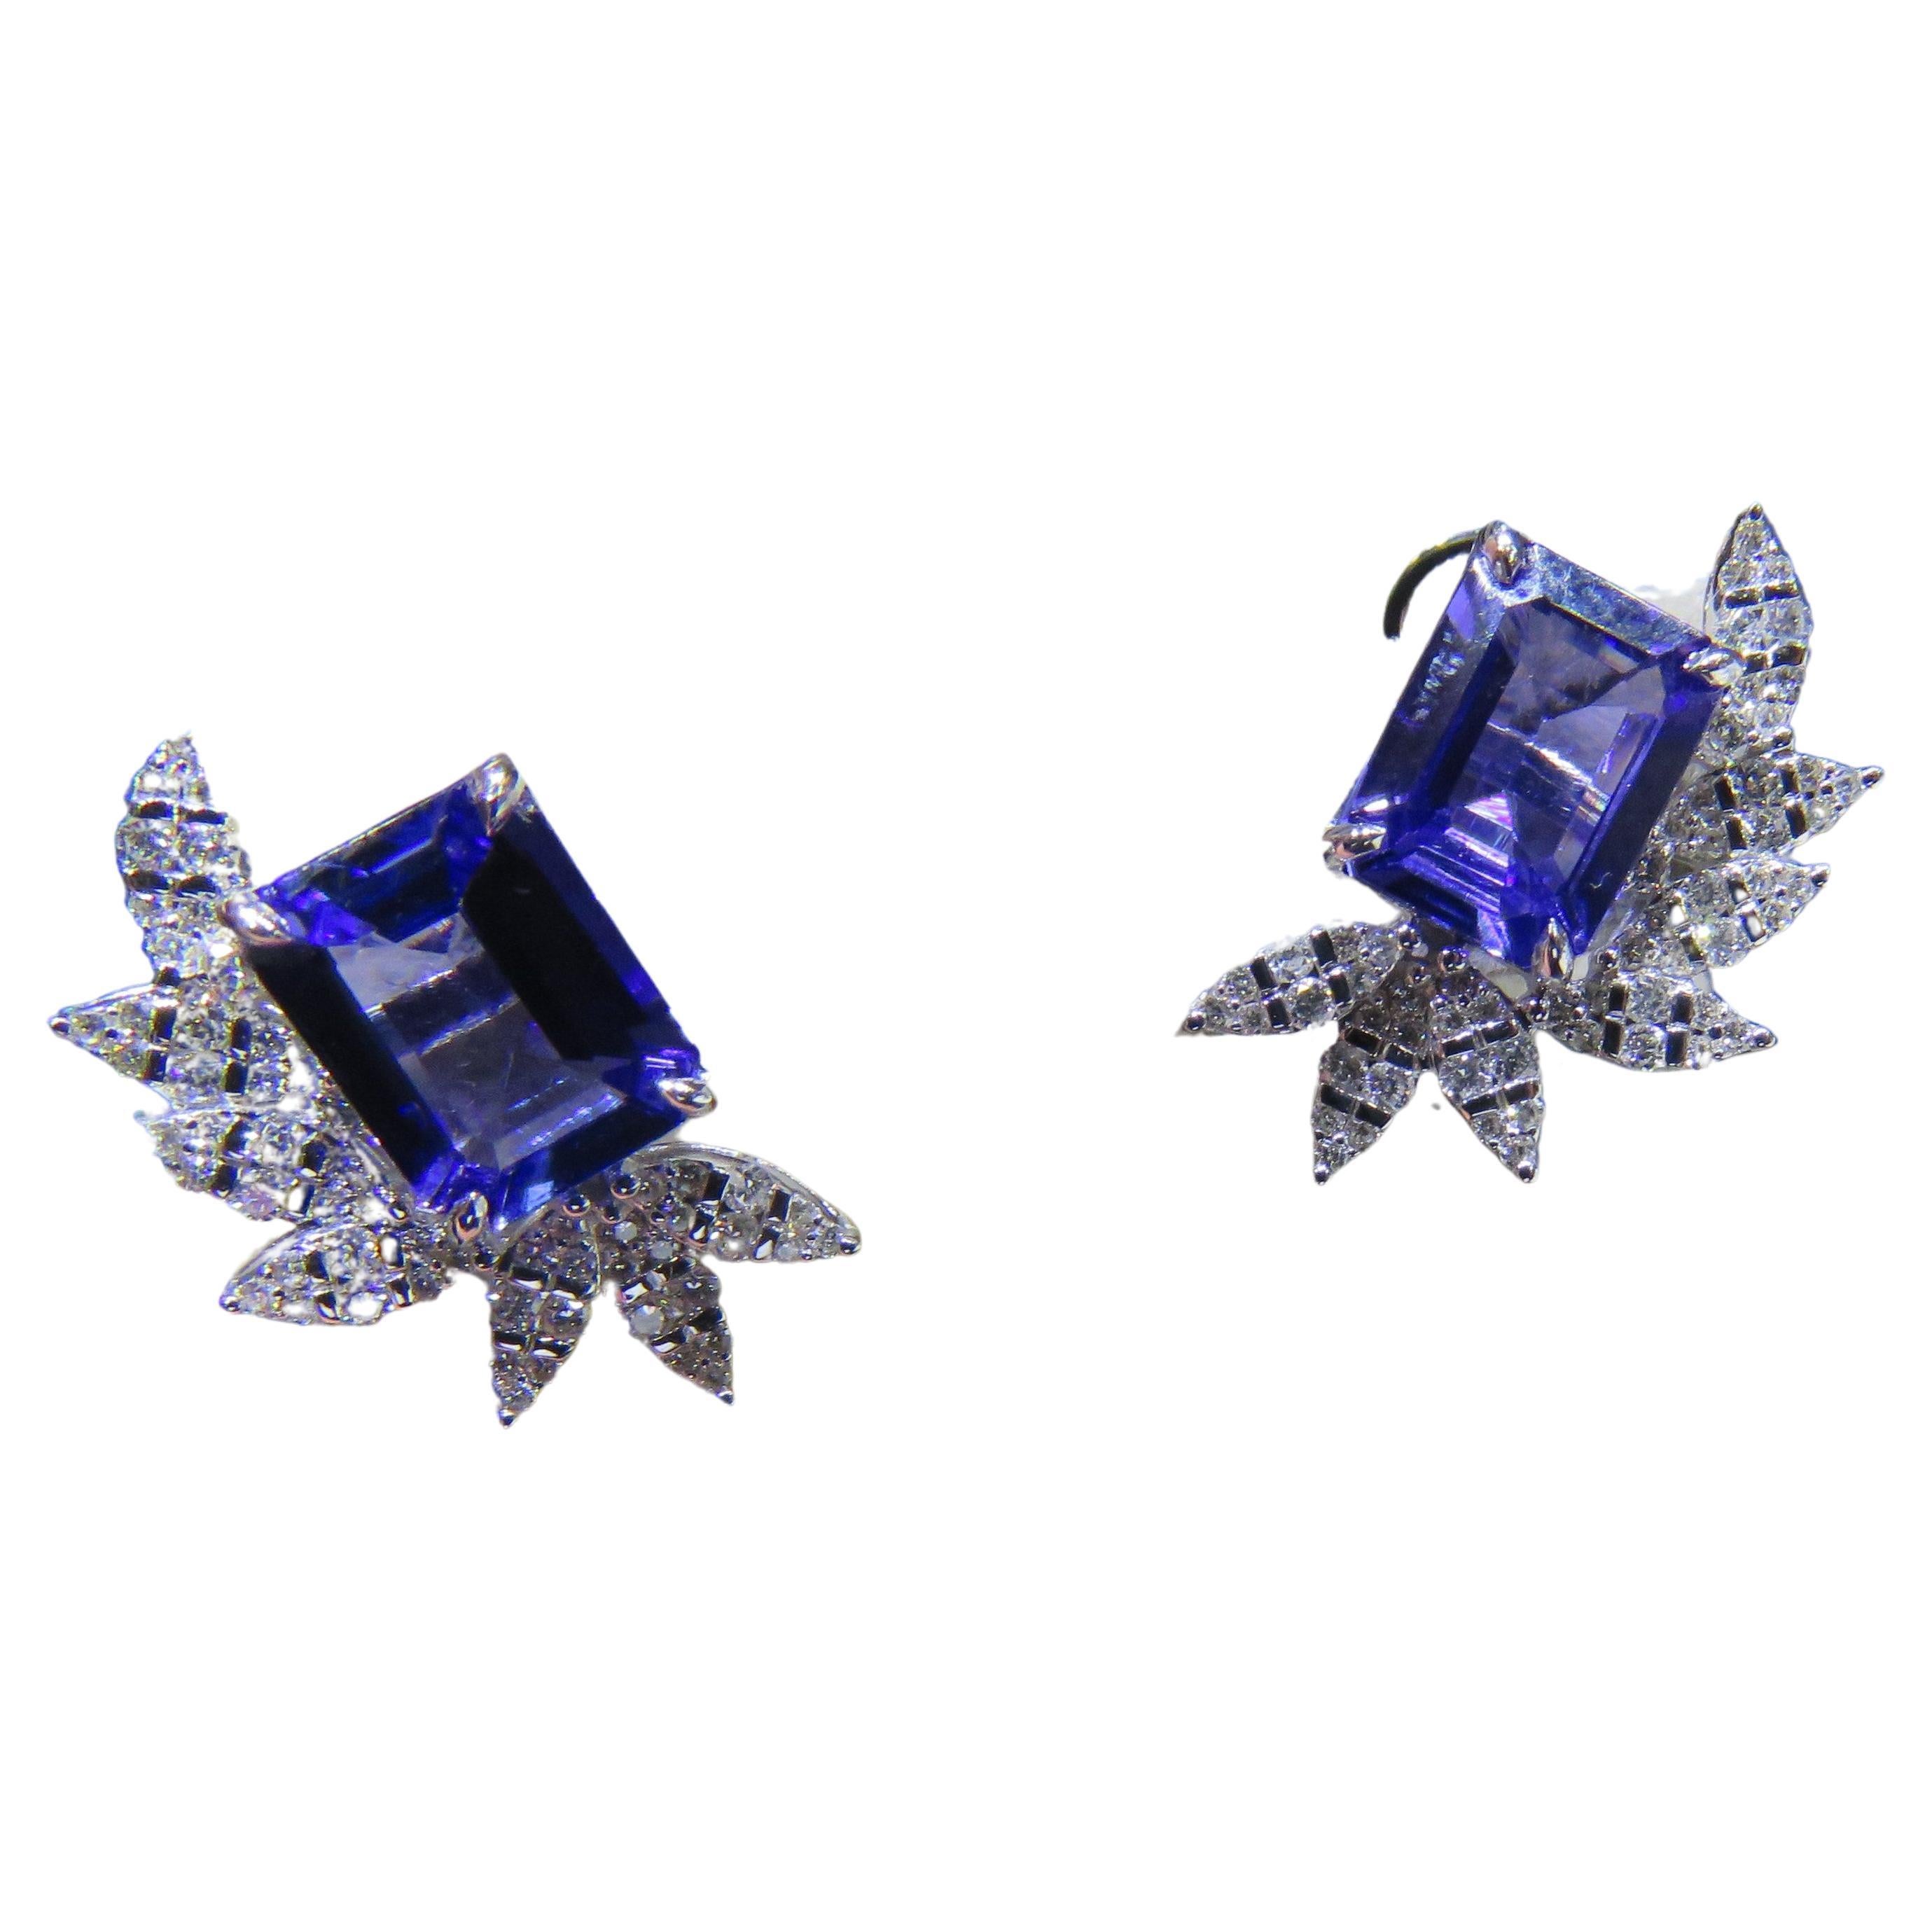 NWT $9, 600 18KT Gold Magnificent Rare Large Fancy Tanzanite Diamond Earrings For Sale